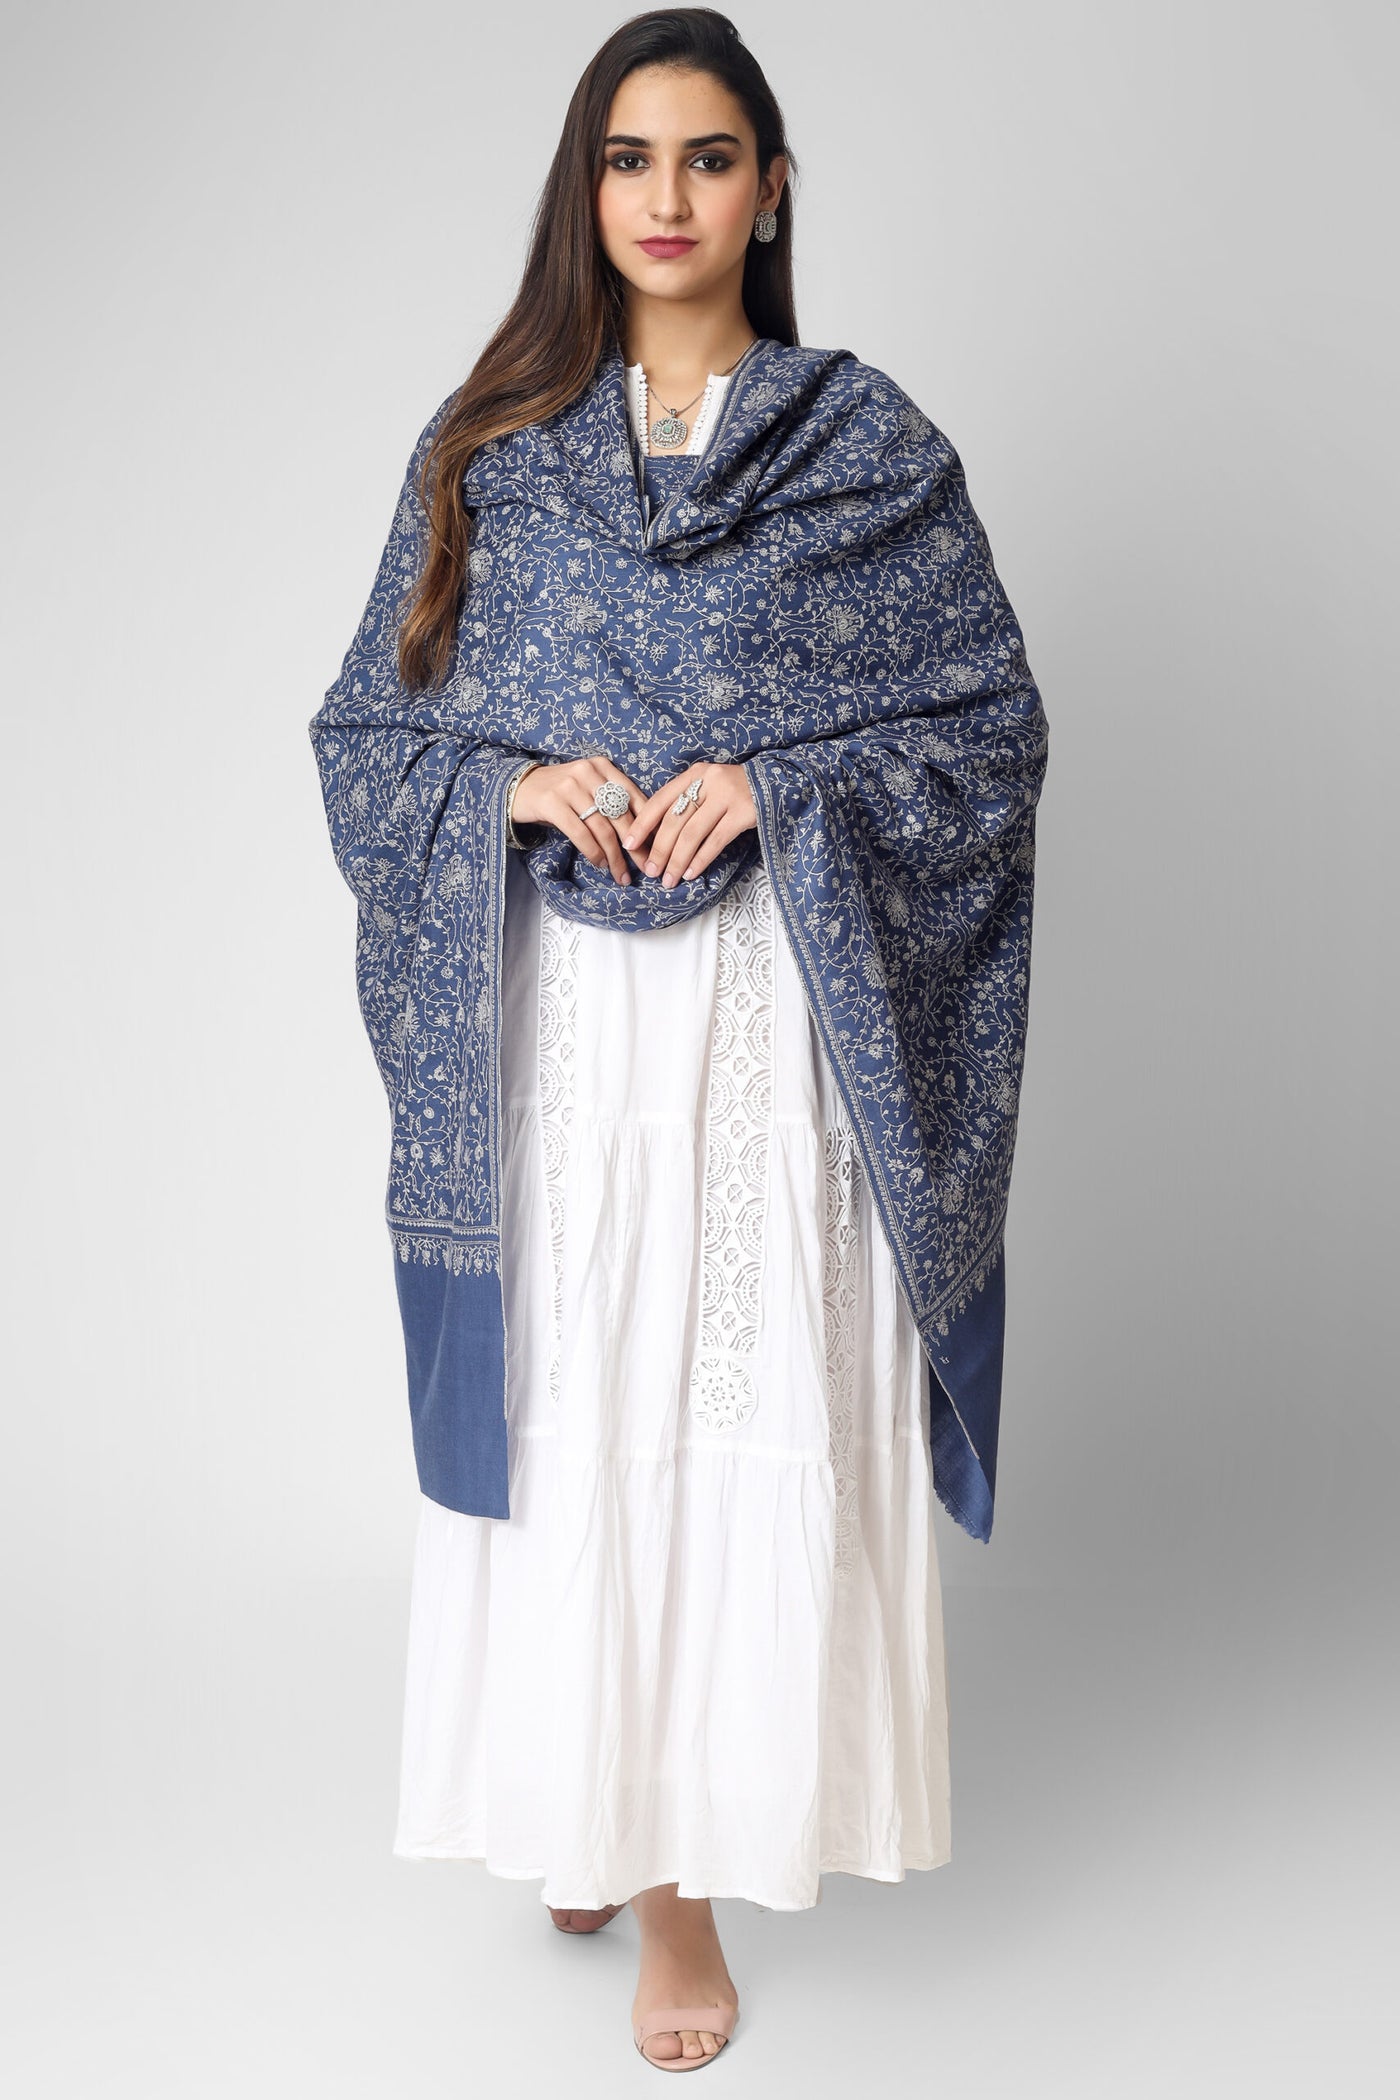  This gorgeous Light Purple Blue Pashmina Shawl, which has the renowned Sozni Embroidery in an intricate Jaldaar pattern, is the result of passion and dedication. 